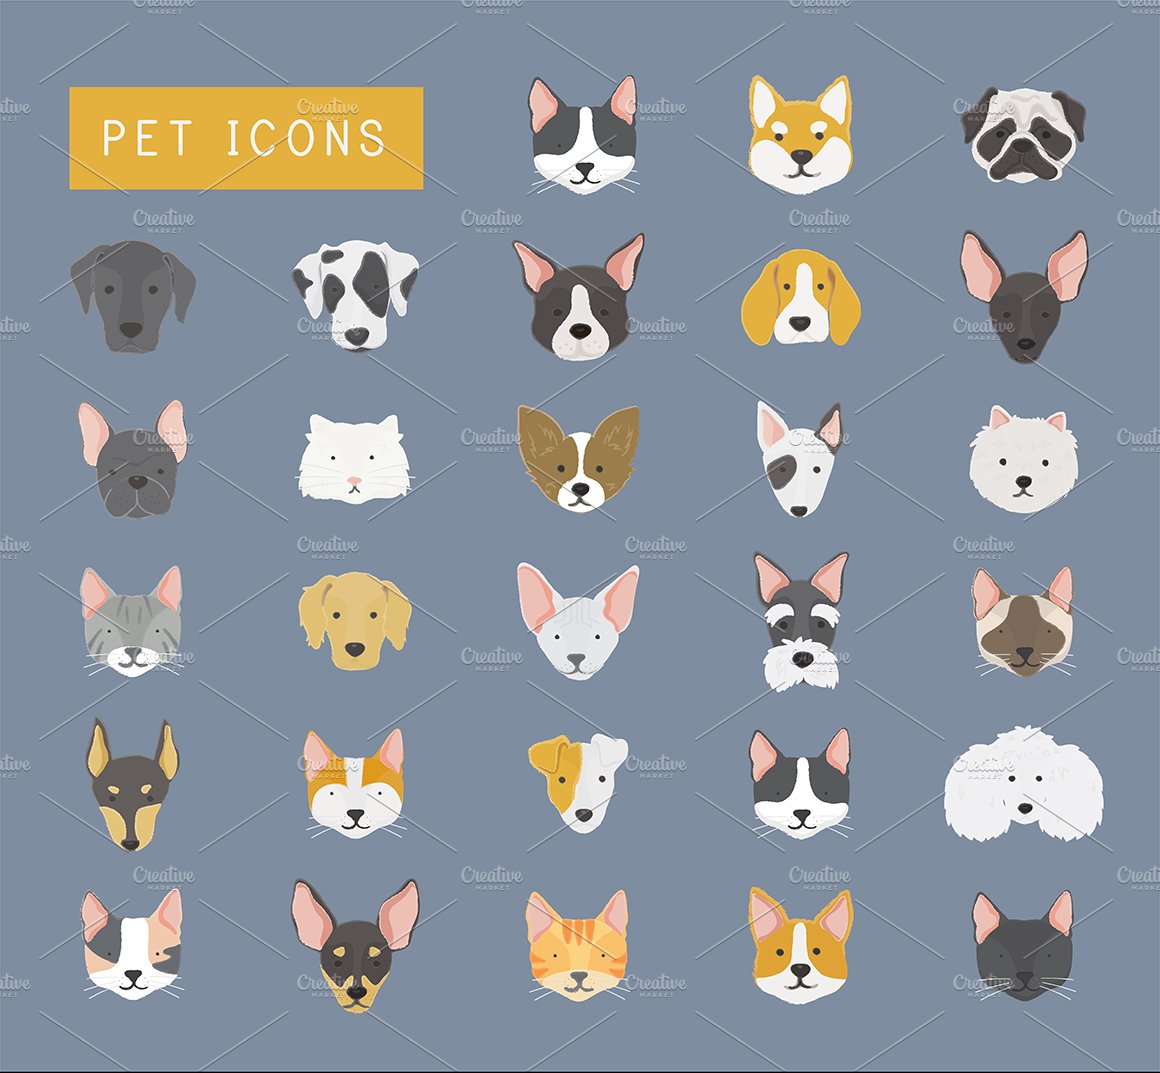 Illustration of cats and dogs cover image.